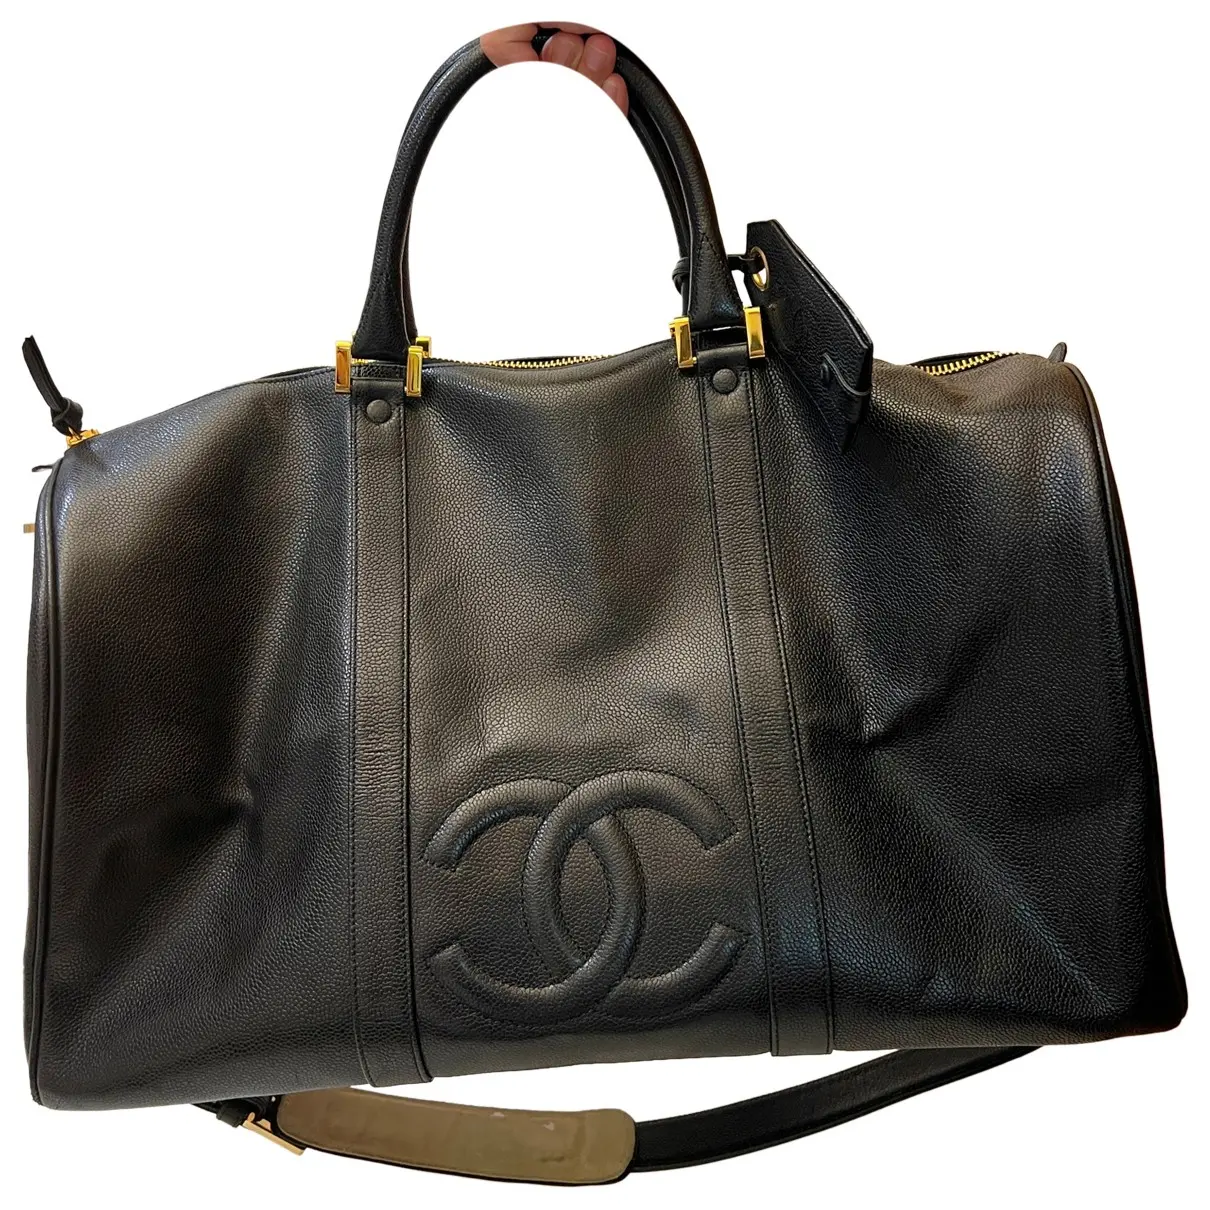 Cambon leather travel bag